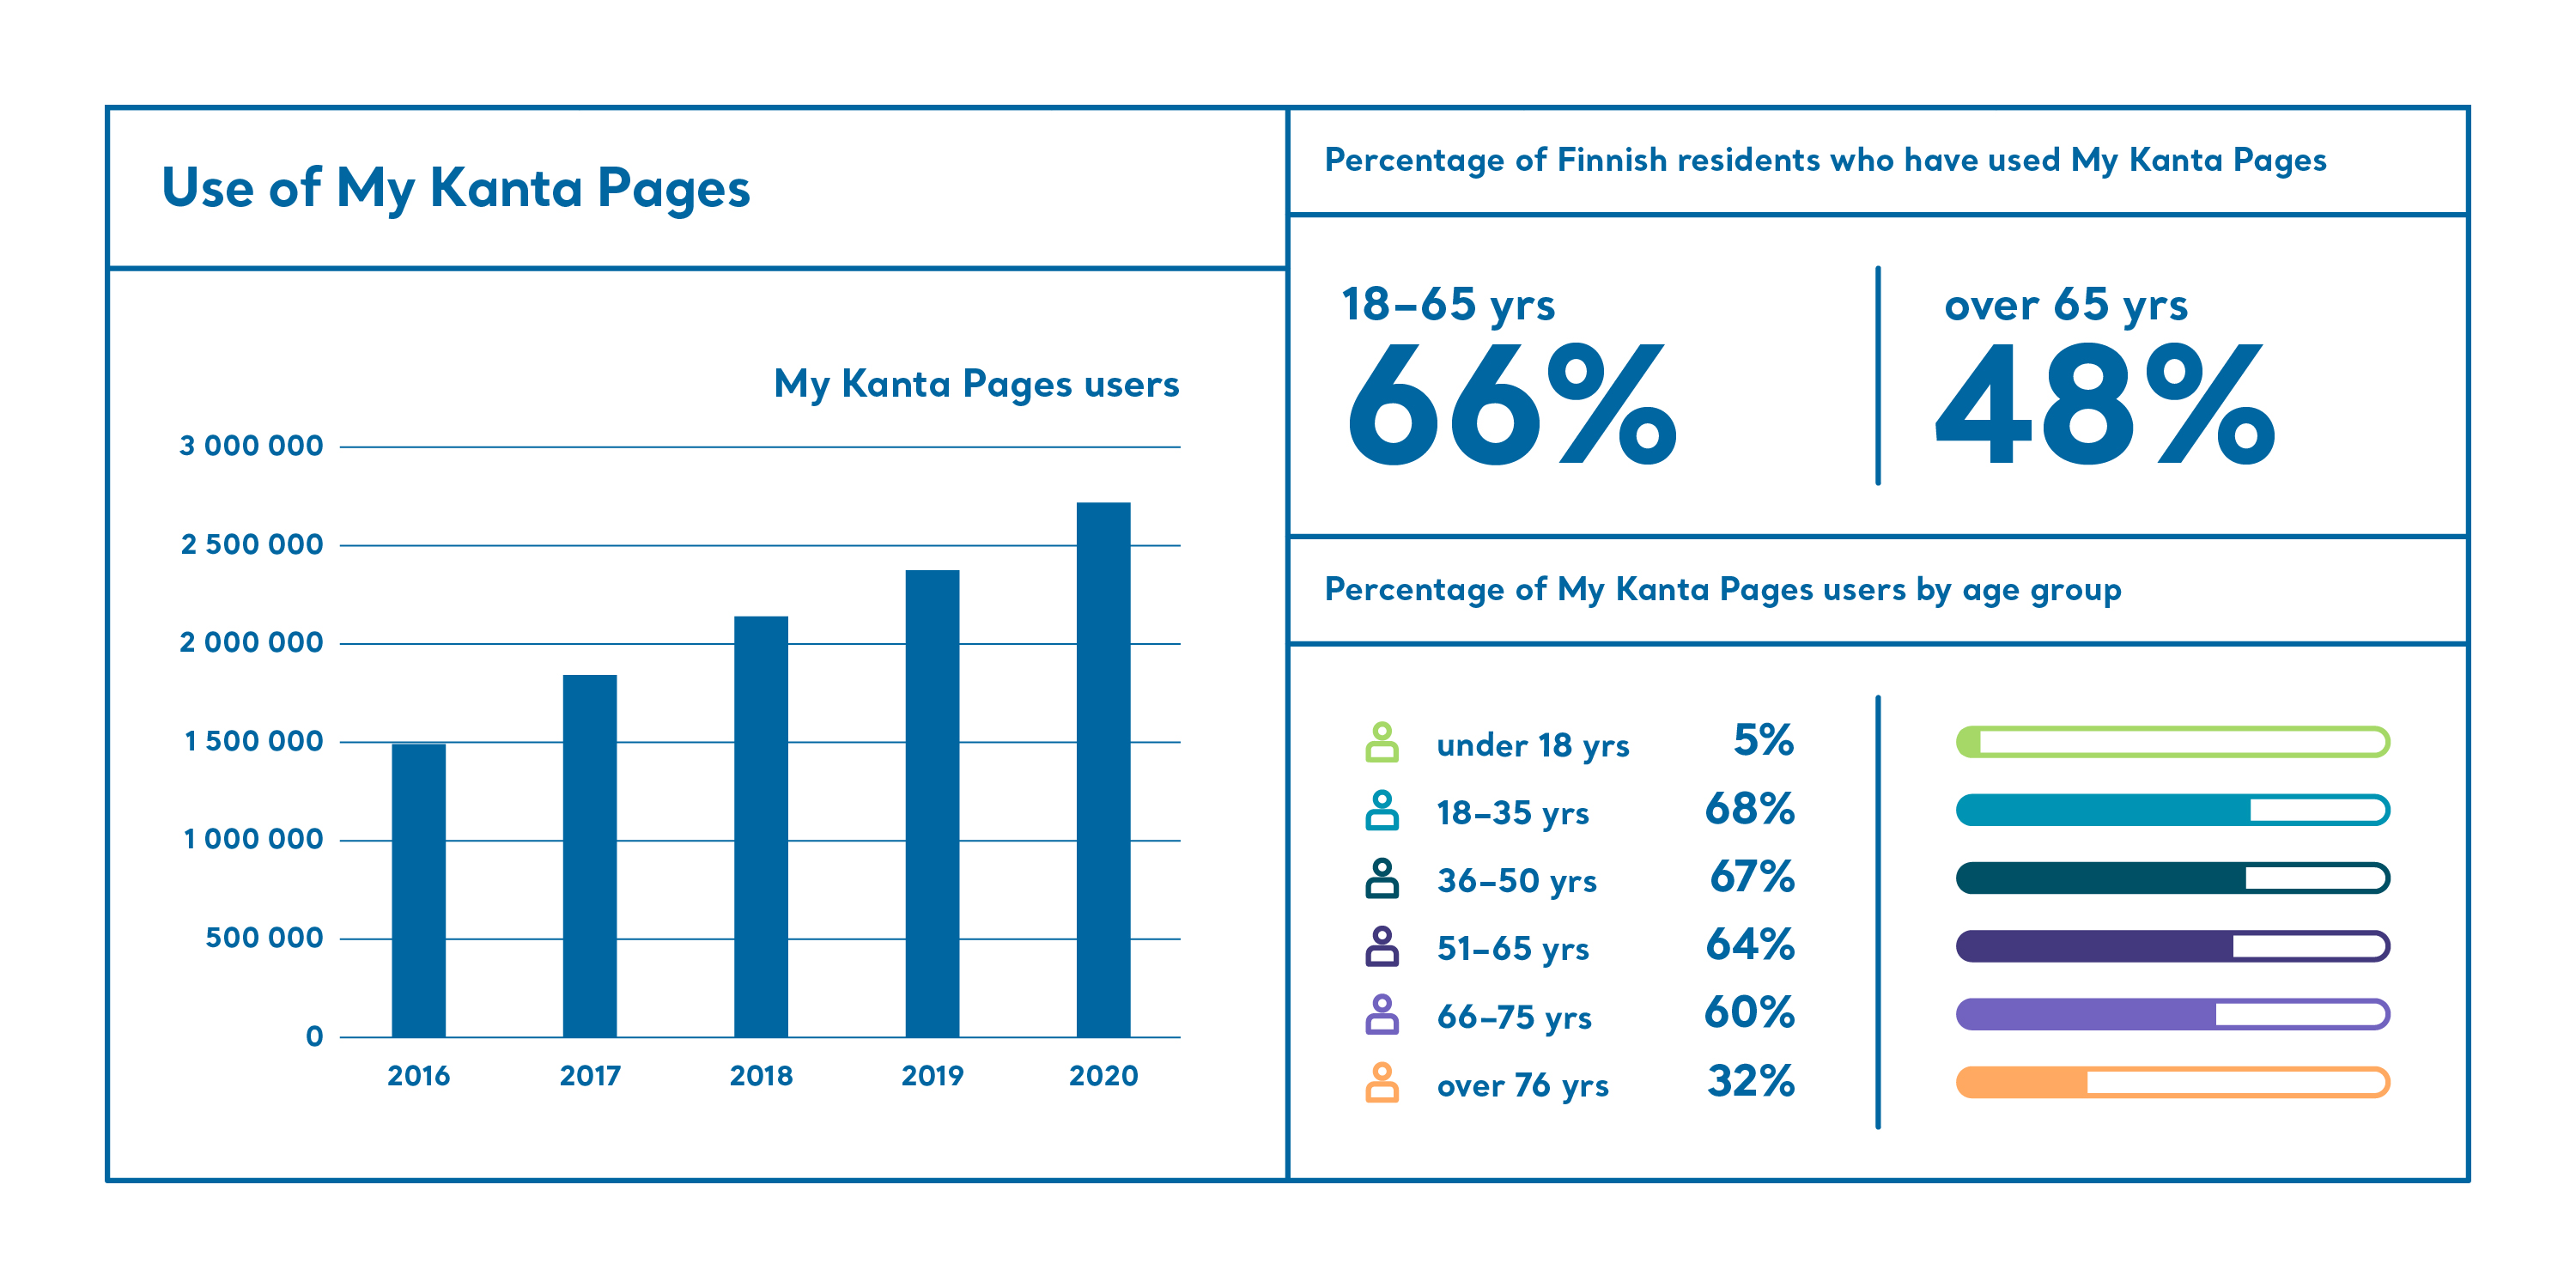 66% of 18-65-year-olds have used My Kanta Pages. 48% of those over 65 have used My Kanta Pages.  Proportion of My Kanta Pages users in each age group in 2020: under 18 yrs = 5%. 18-35 yrs = 68%. 36-50 yrs = 67%. 51-65 yrs = 64%. 66-75 yrs = 60%. over 76 yrs = 32%. 